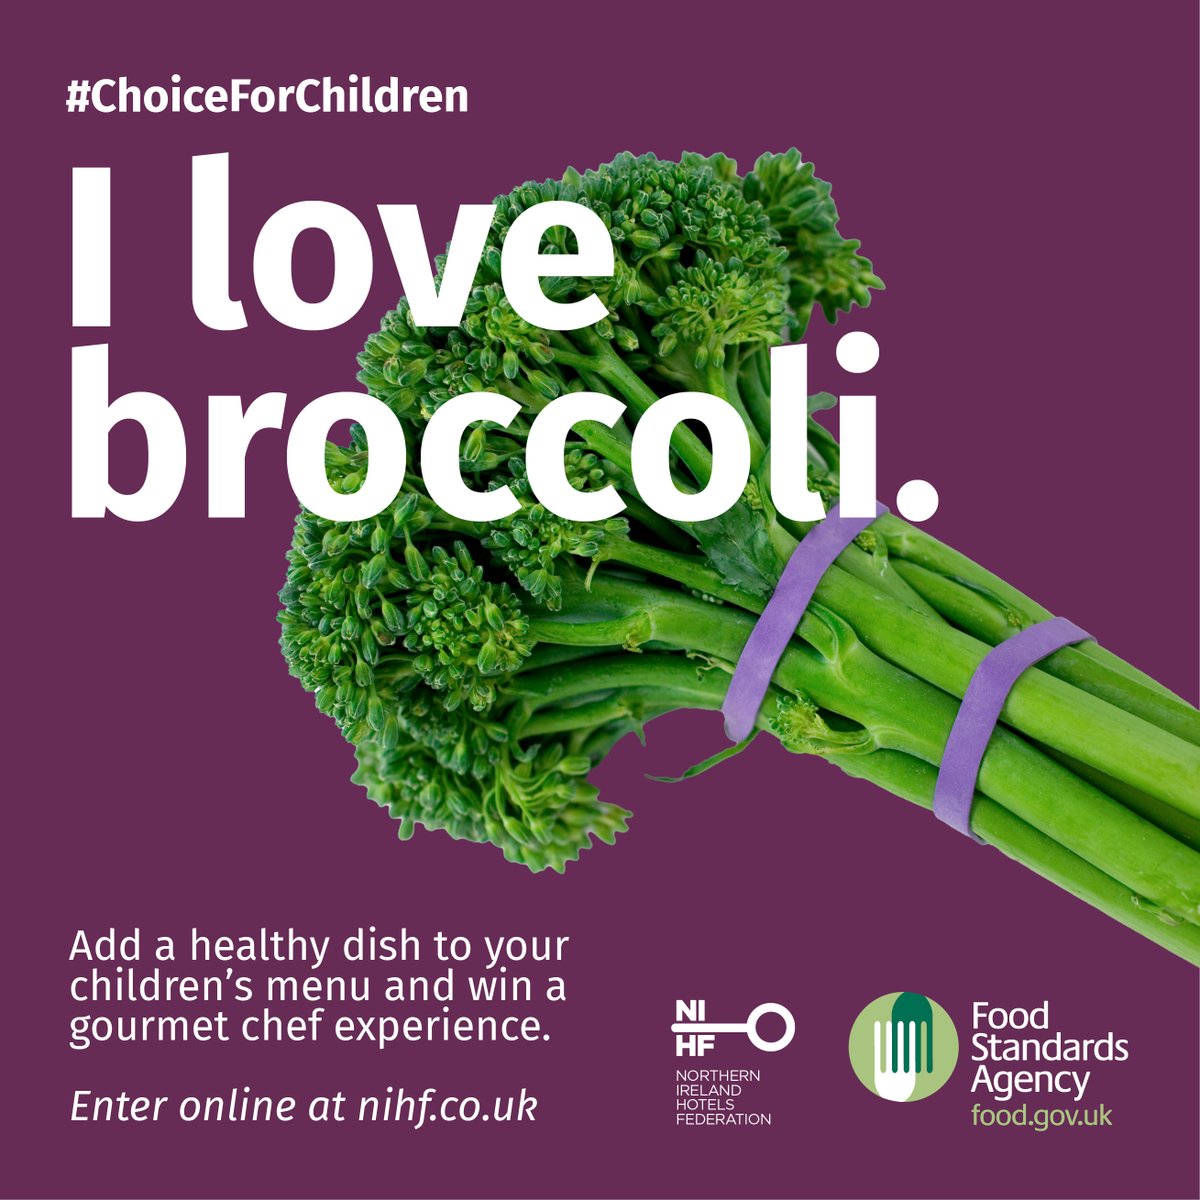 ENTERIES CLOSE AT 12 NOON TODAY! 🥦 Add a healthy dish to your children’s menu for your chance to WIN a gourmet chef experience. 🍴 Don't delay,,enter now visit nihf.co.uk/choice-for-chi… #NIHF #FSA #ChoiceForChildren #Competition @foodgov